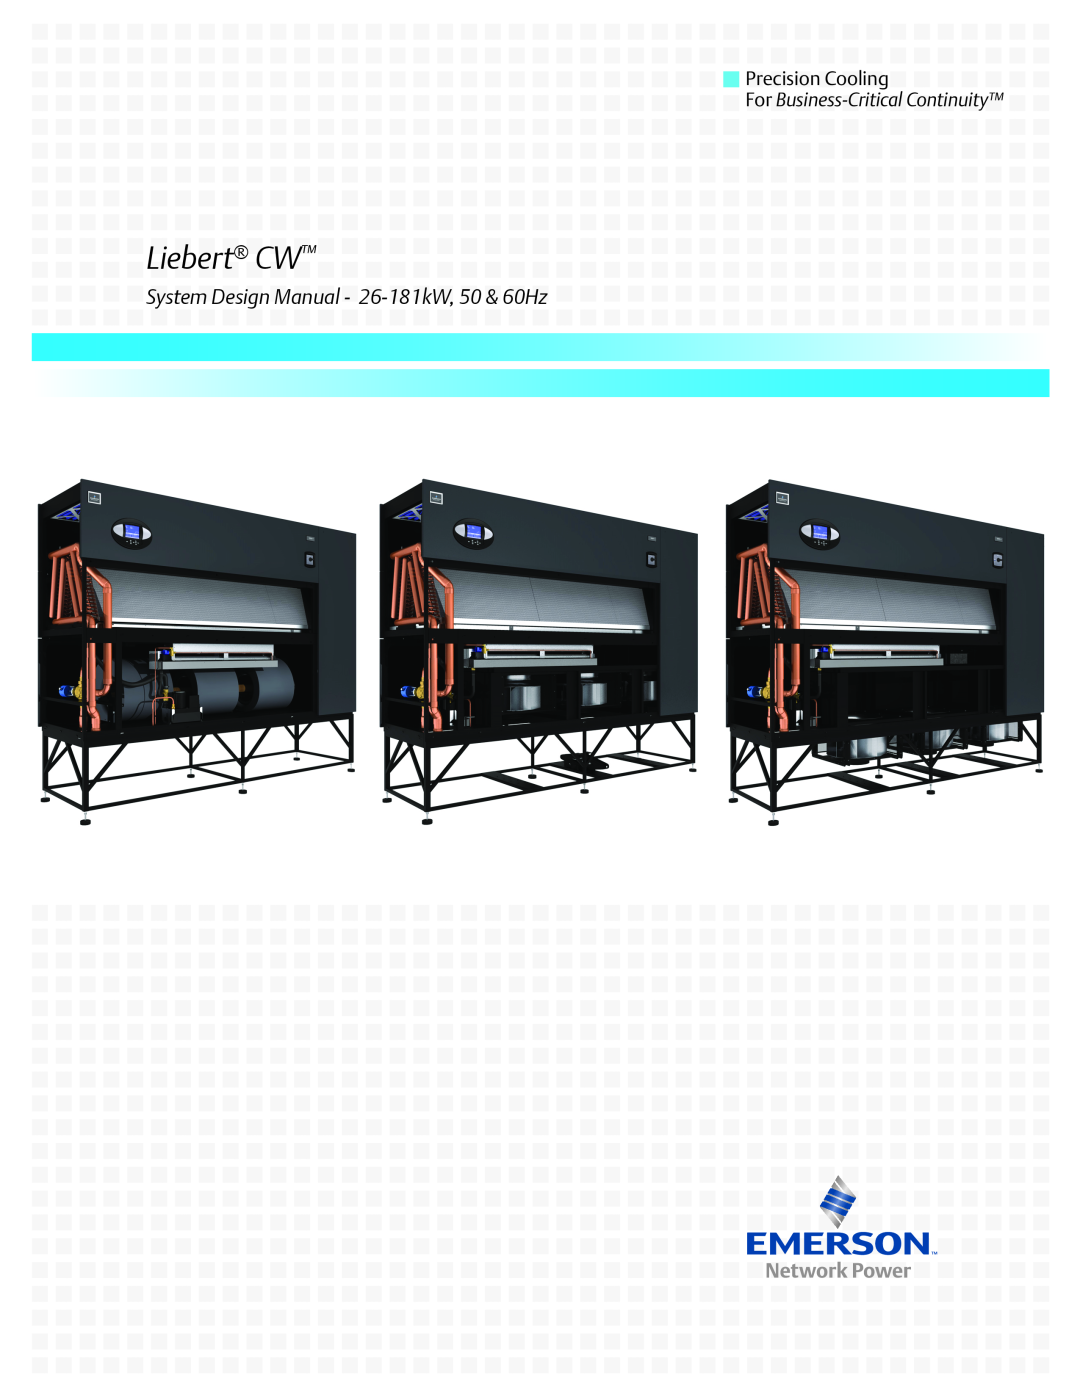 Emerson manual Liebert CW, Precision Cooling, System Design Manual - 26-181kW, 50 & 60Hz 